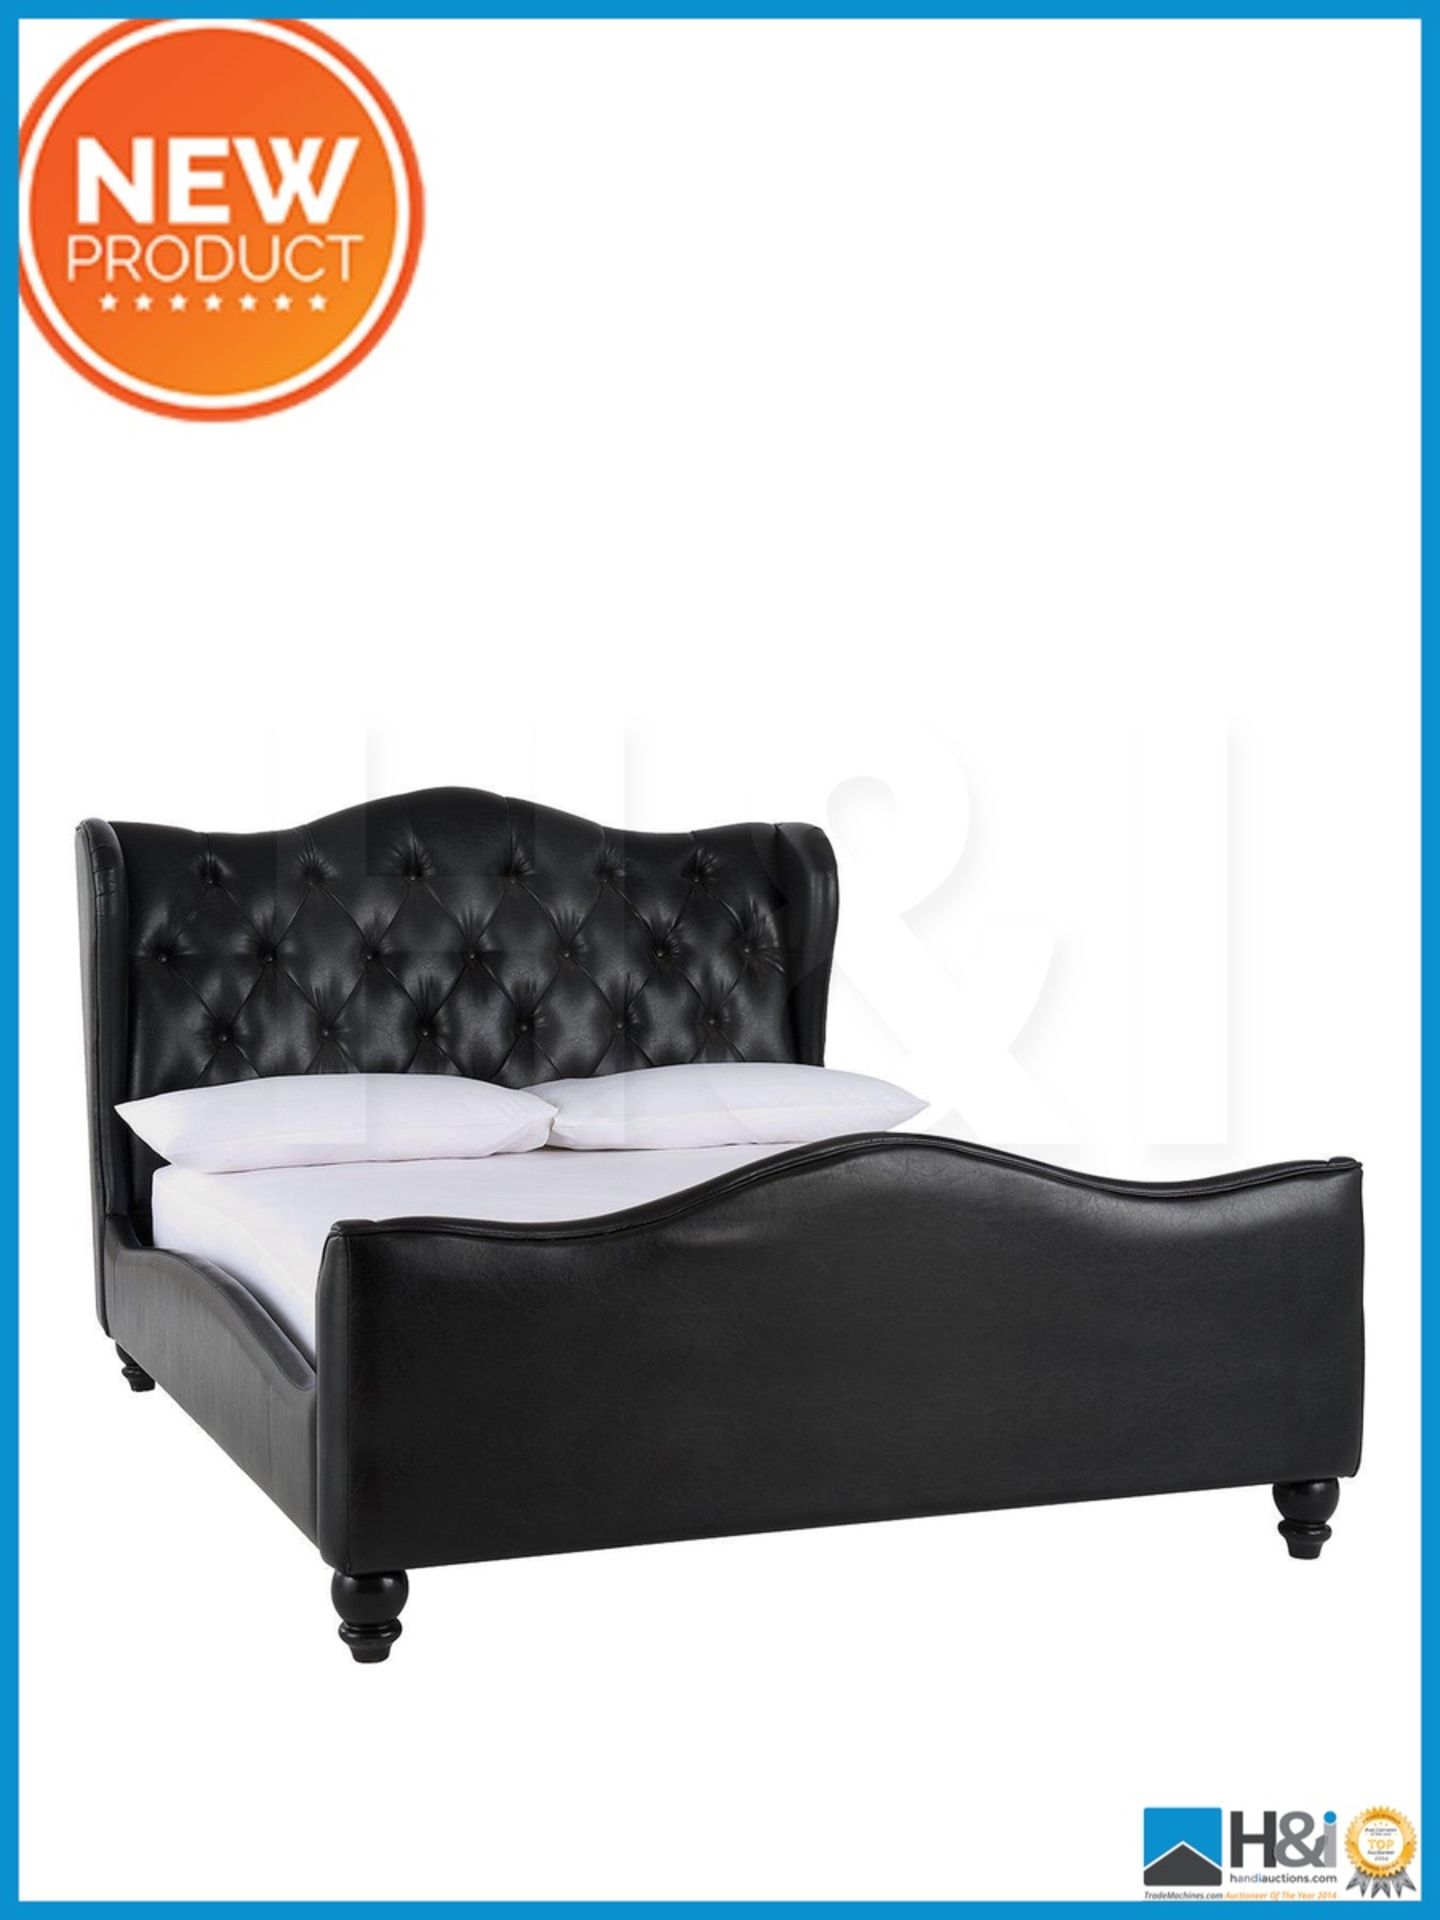 NEW IN BOX CHELMSFORD KING BED [BLACK] 220 x 117 x 151cm RRP £844 Appraisal: Viewing Essential